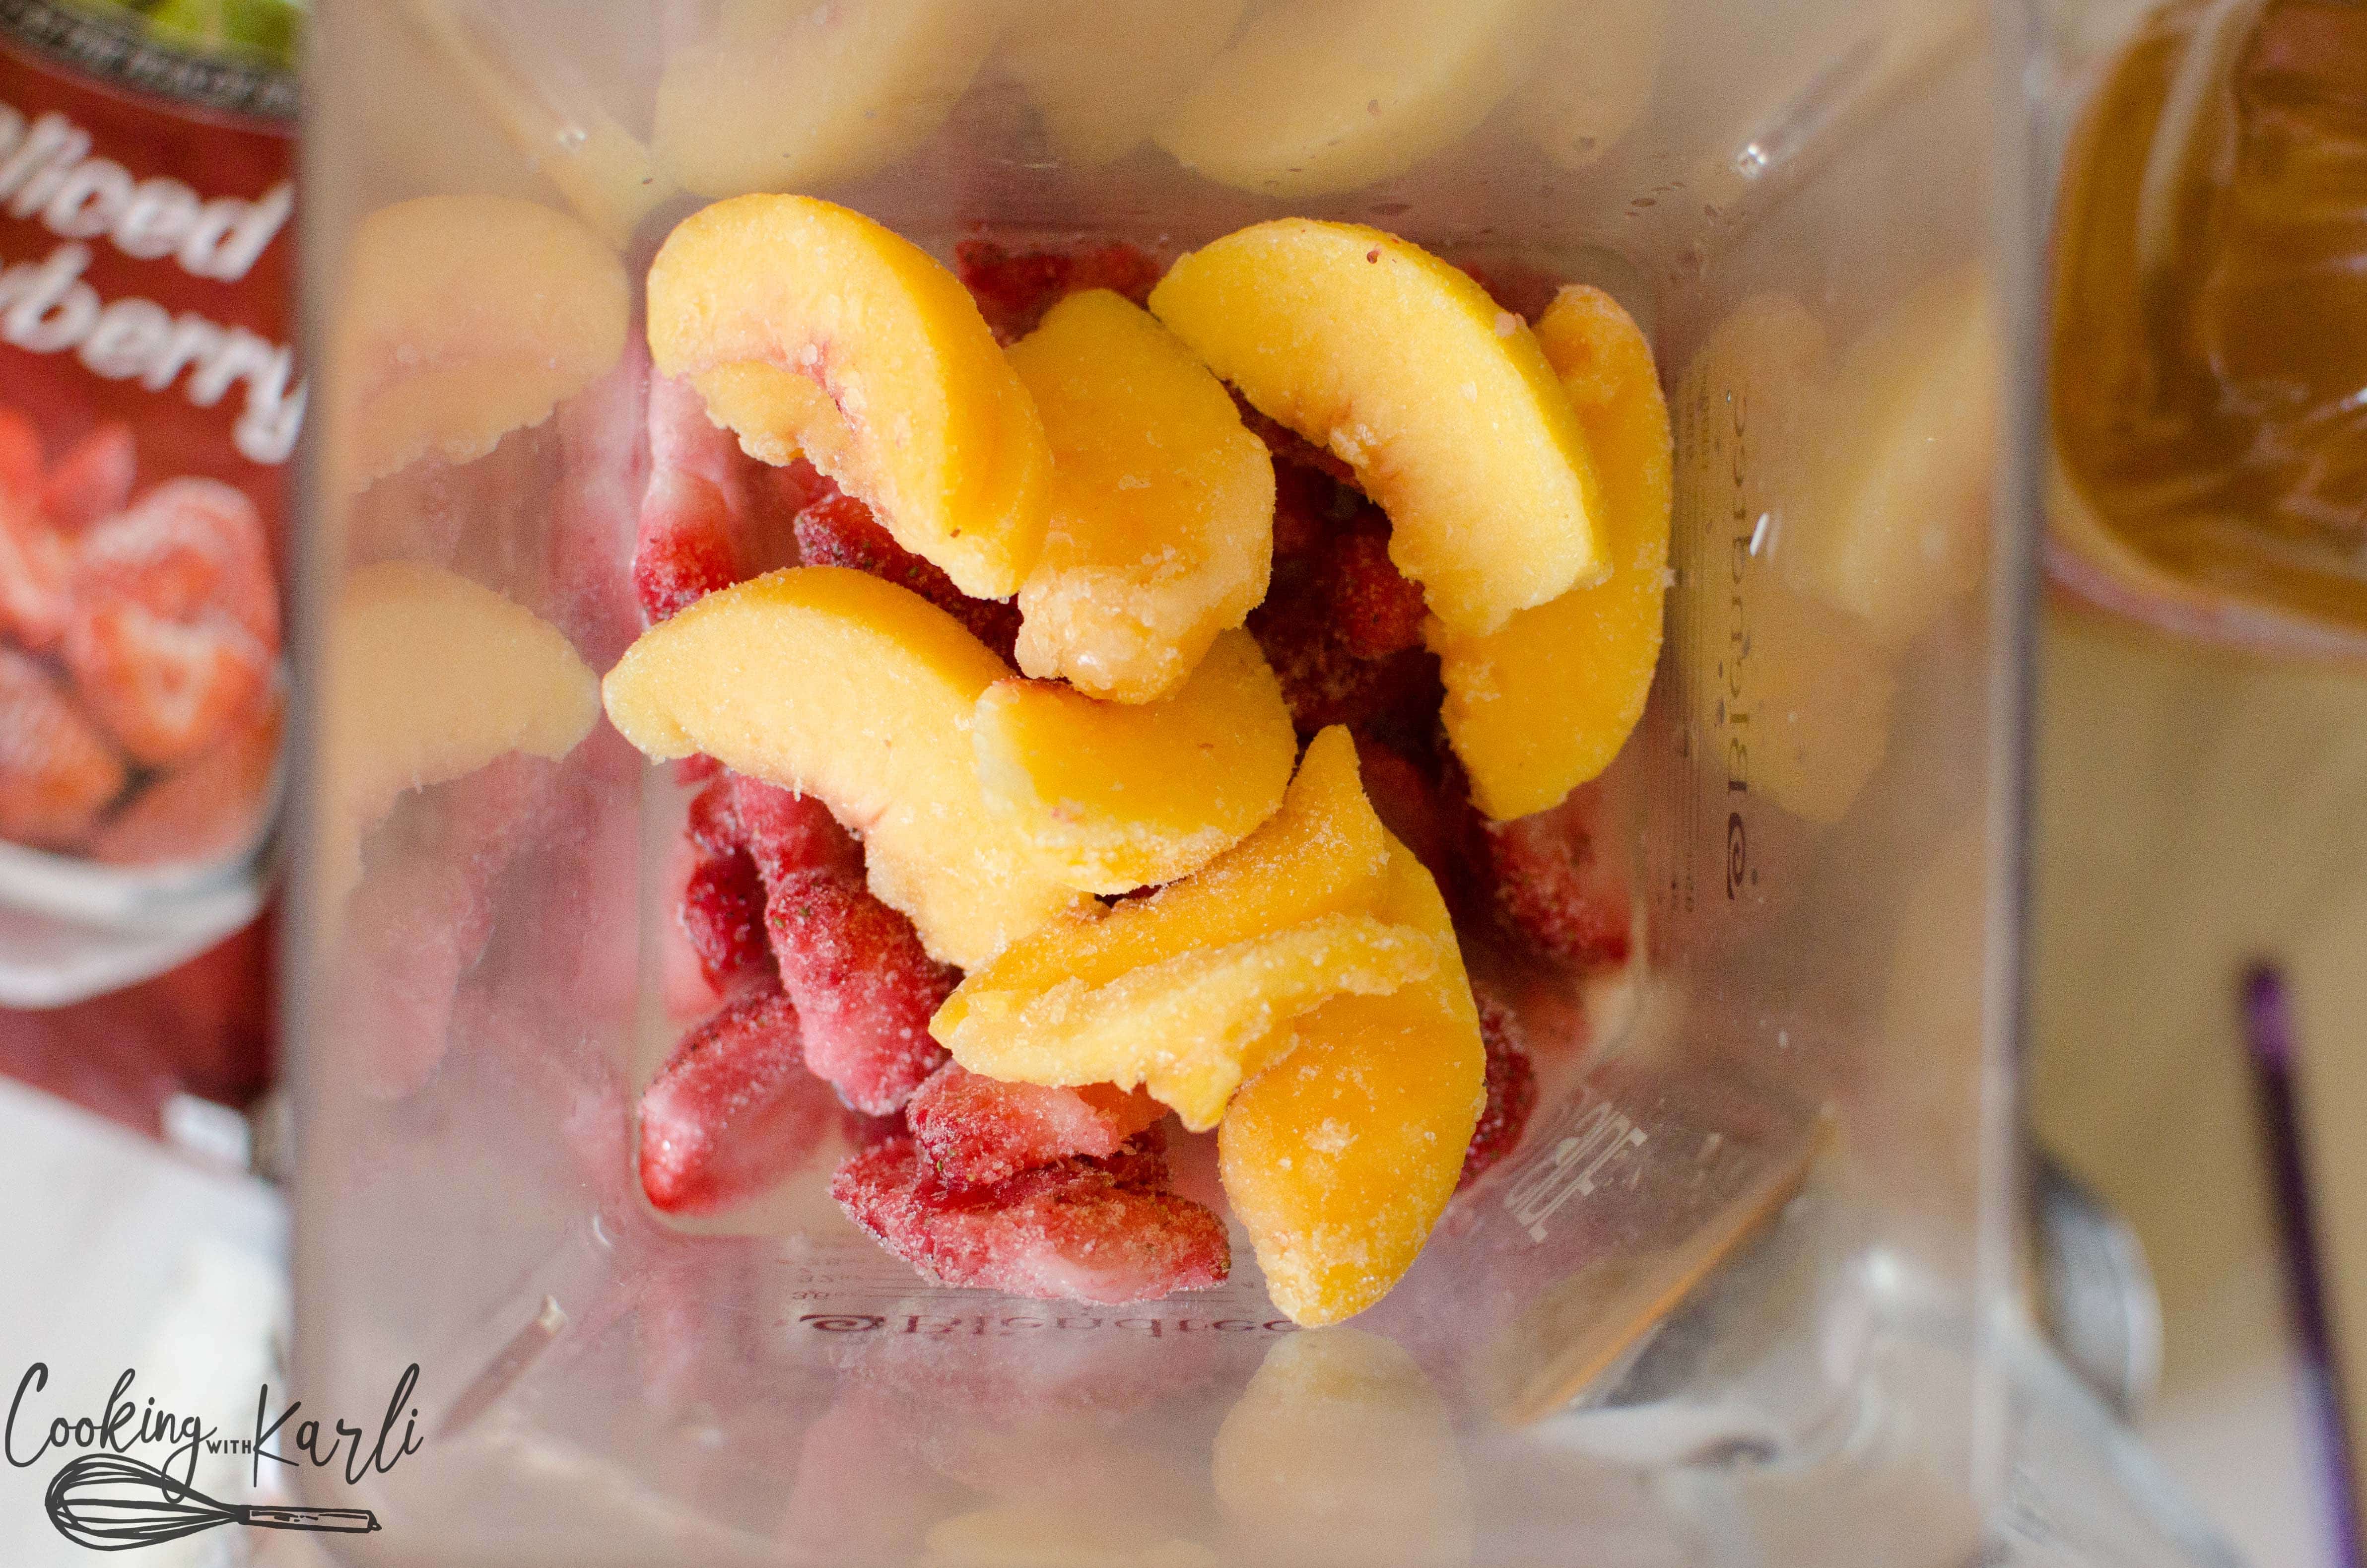 Frozen Fruit is used to make this homemade fruit smoothie.